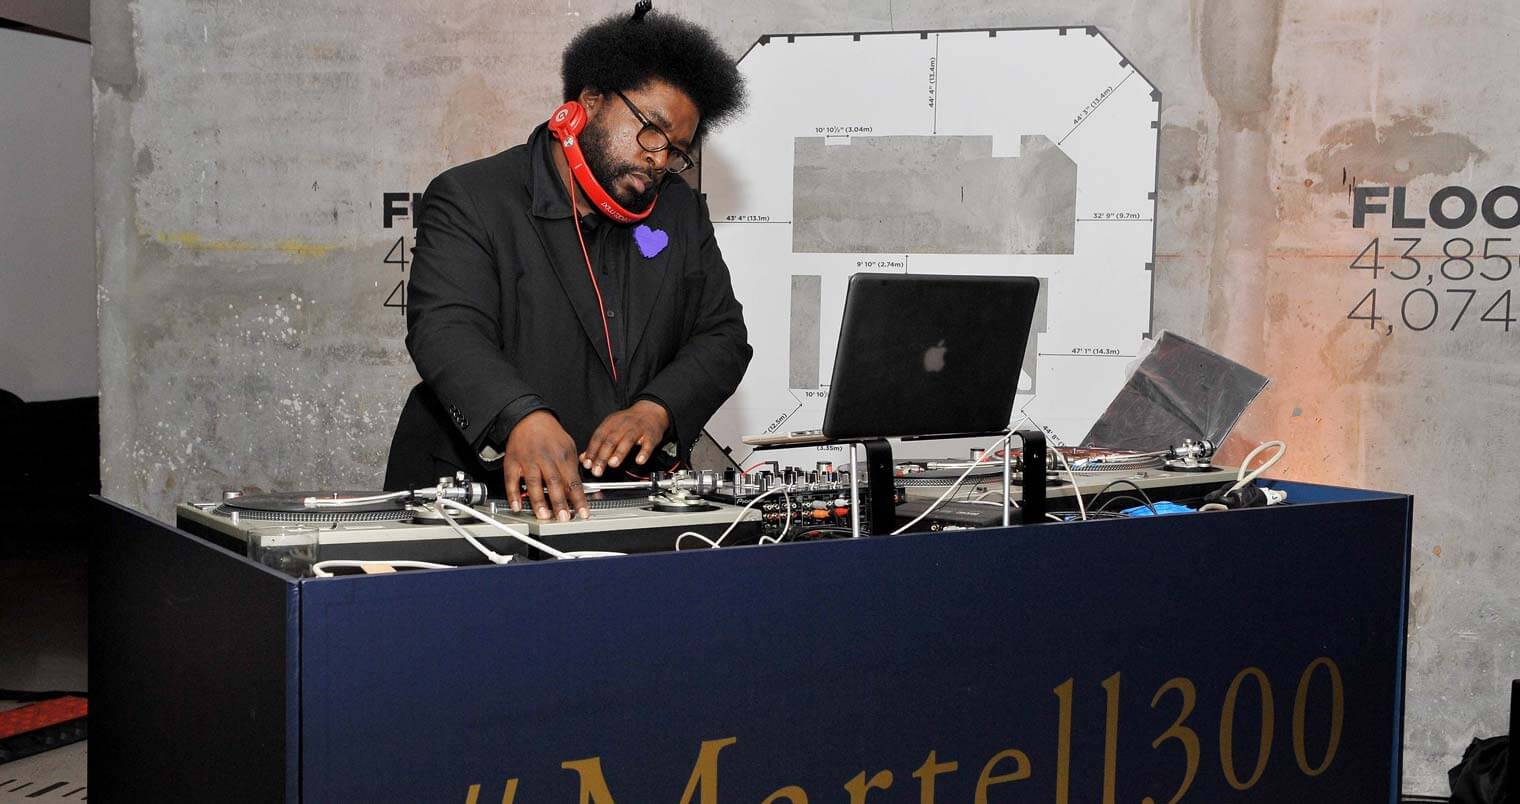 Martell and Legendary Band, The Roots, Debut The Vanguard Series